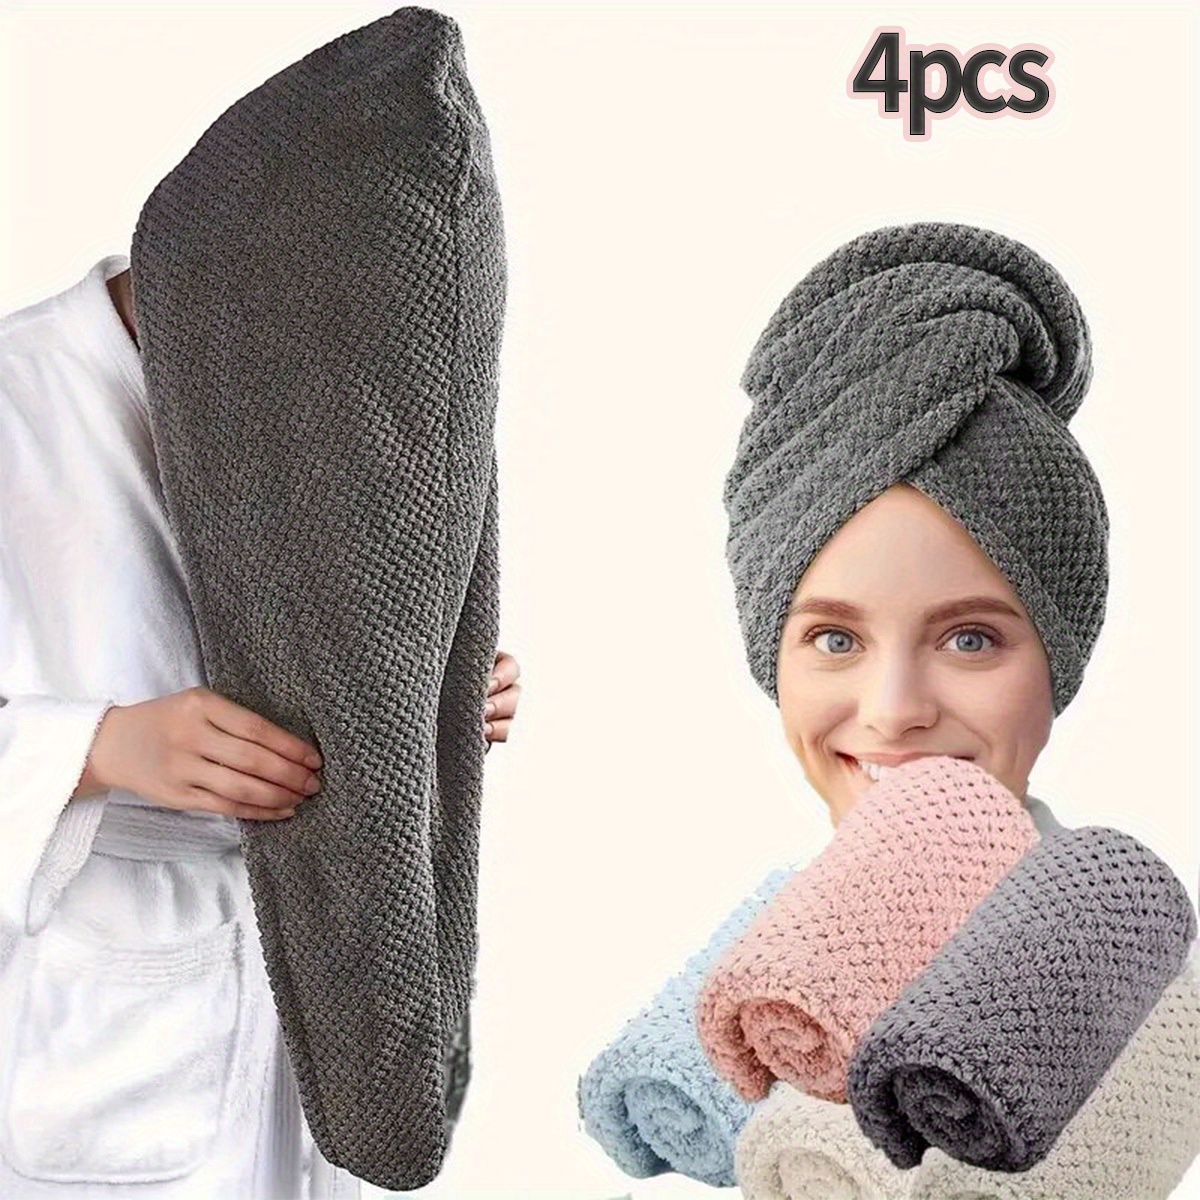 

Ultra-soft Microfiber Hair Towel - Quick Dry, -free Turban For Wet Hair - Super Absorbent Polyester Blend - Contemporary Solid Color Design - Perfect Bathroom Accessory, 1pc/4pcs Set